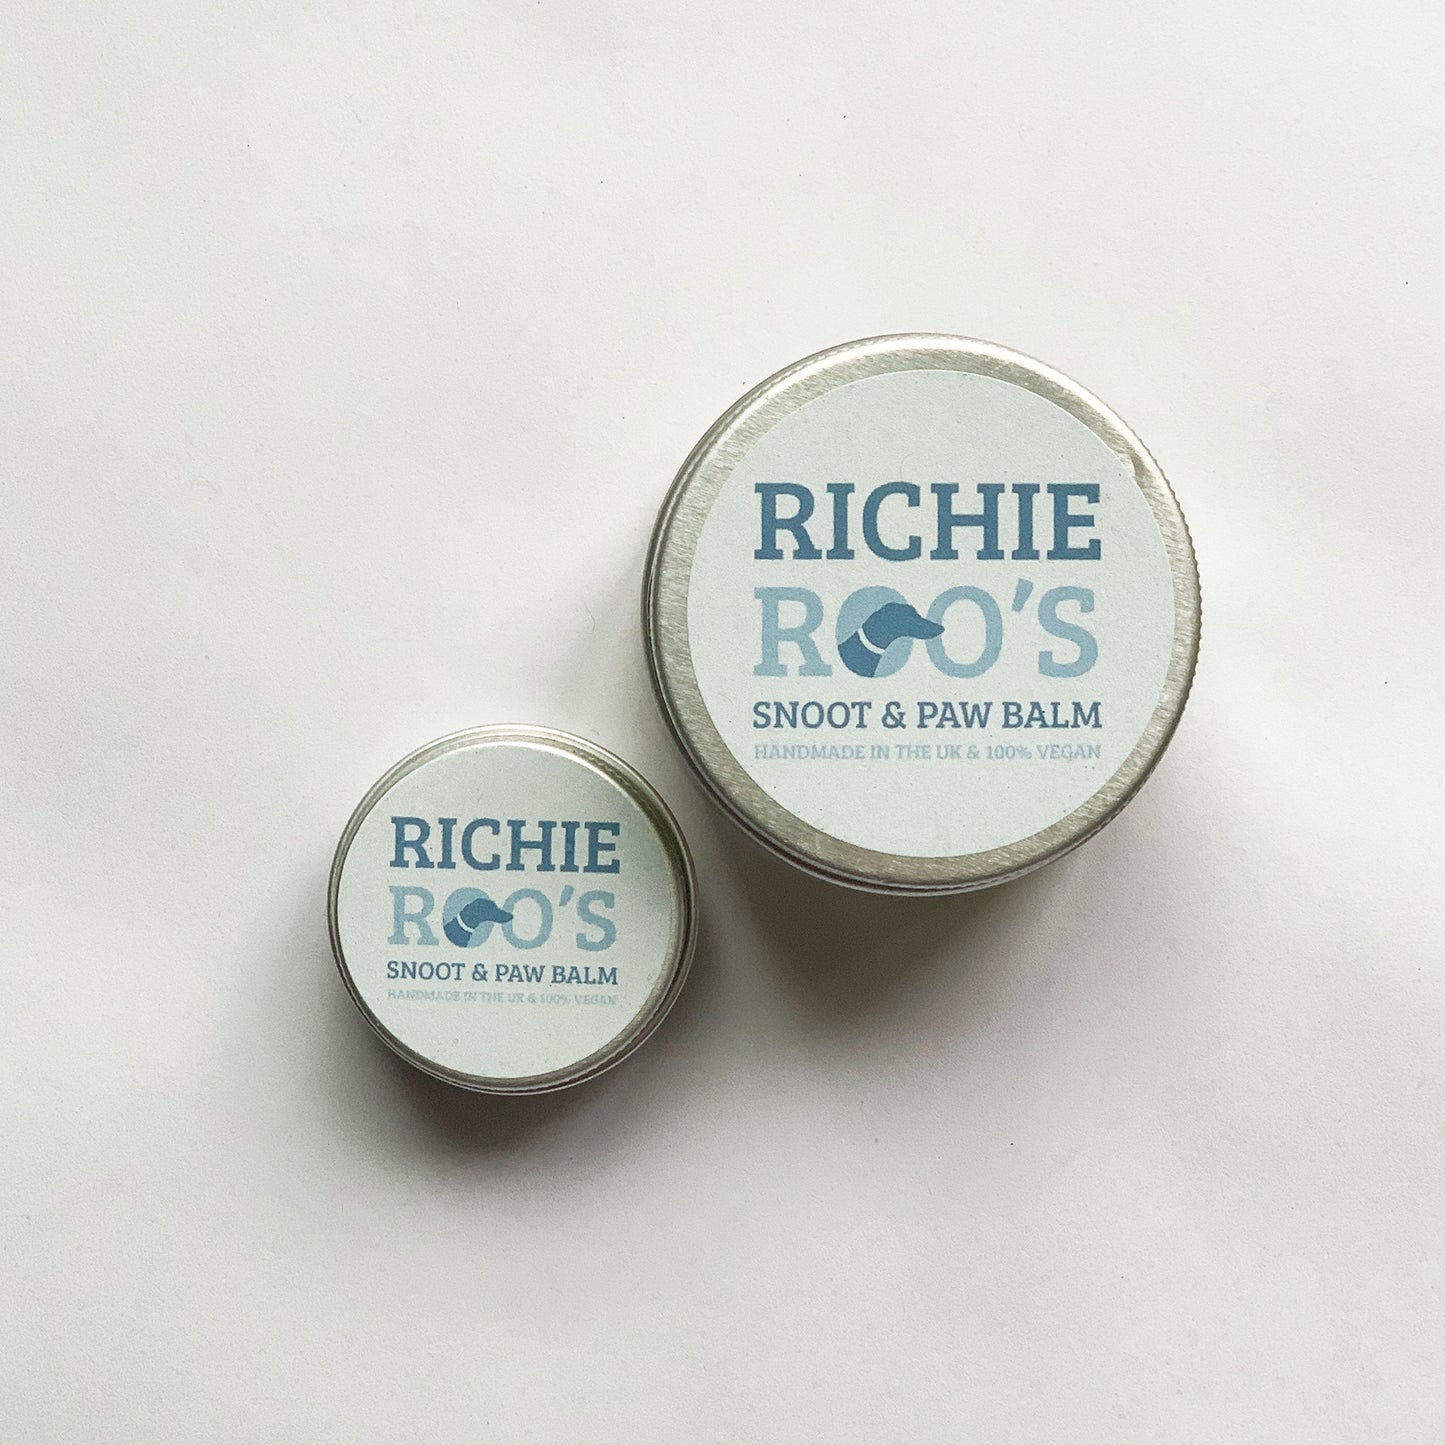 Richie Roo's Snoot and Paw Balm / Nose and Paw Butter